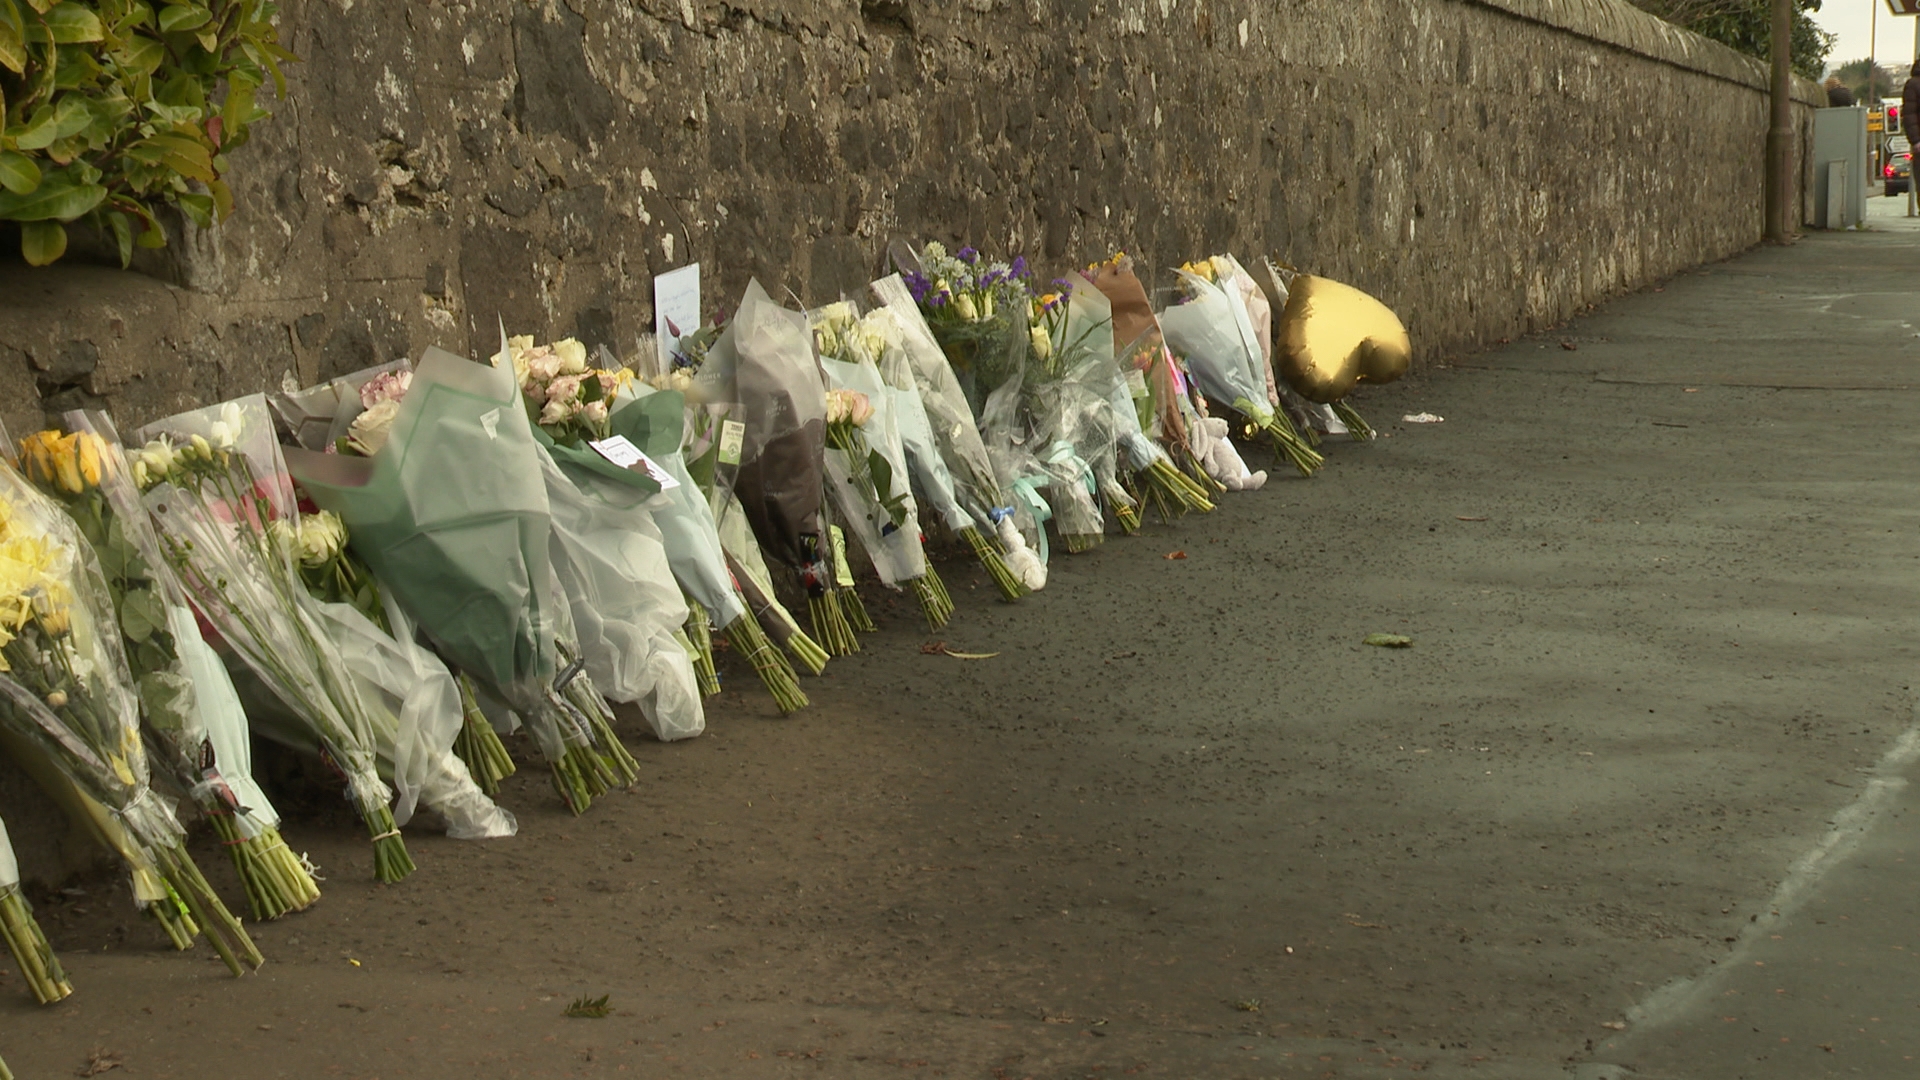 People have left flowers near the road where the boy was hit.